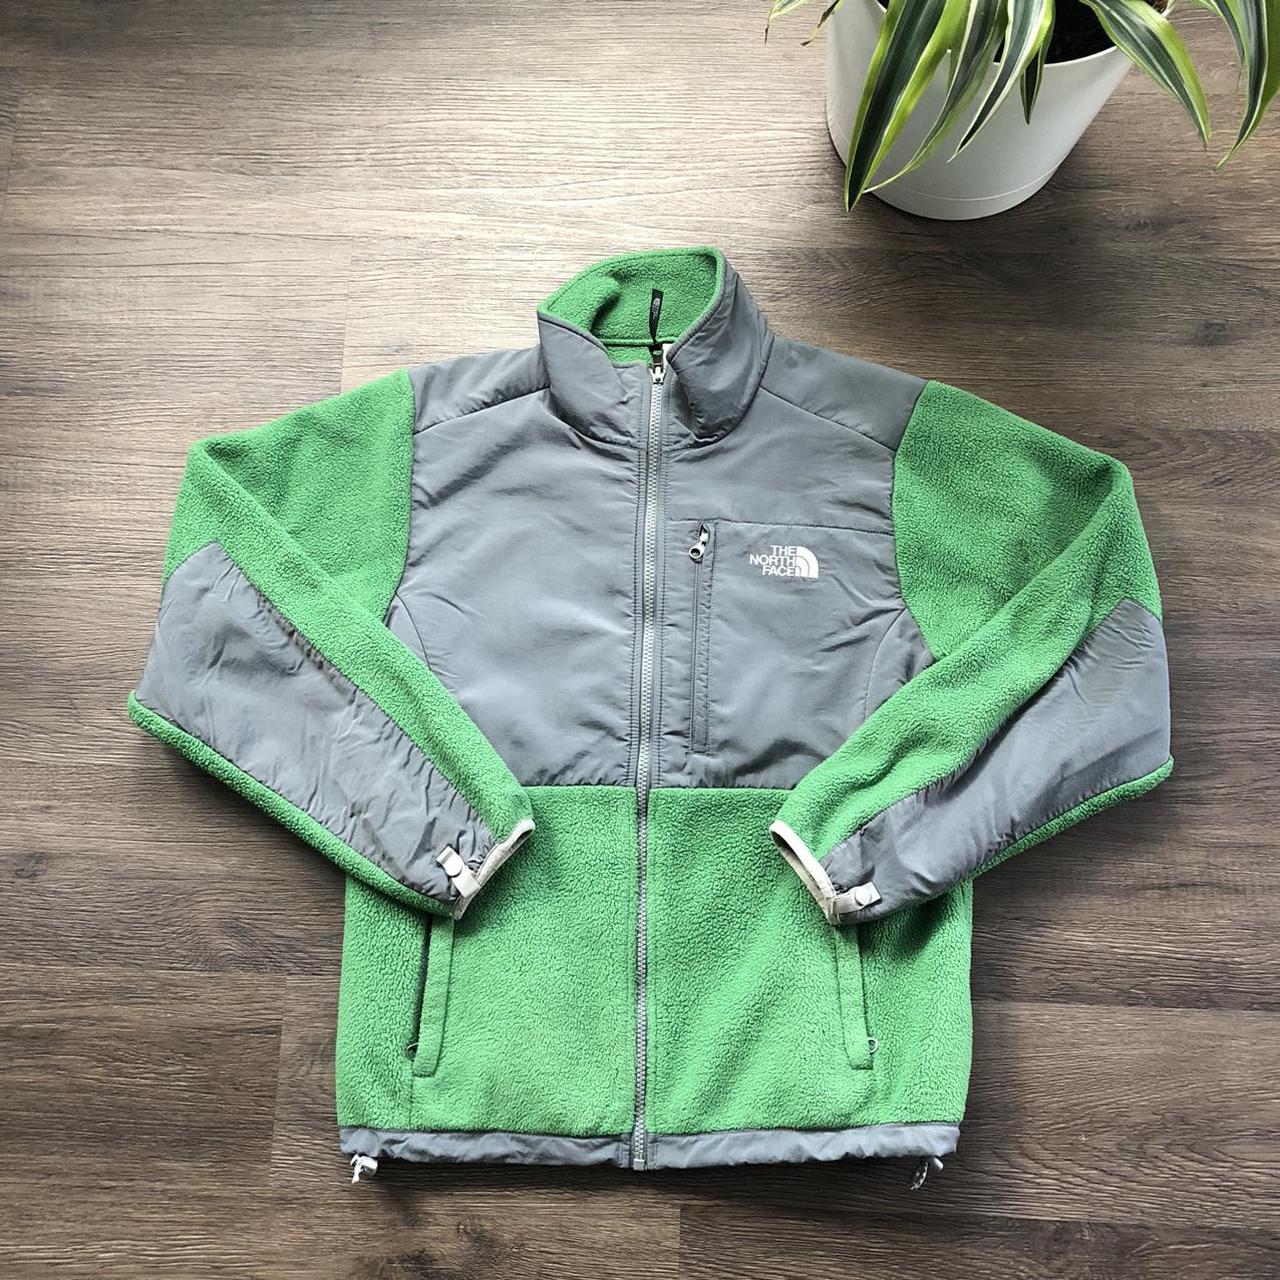 Product Image 1 - 🔥🌨WOMENS NORTH FACE JACKET🌨🔥
-Green and